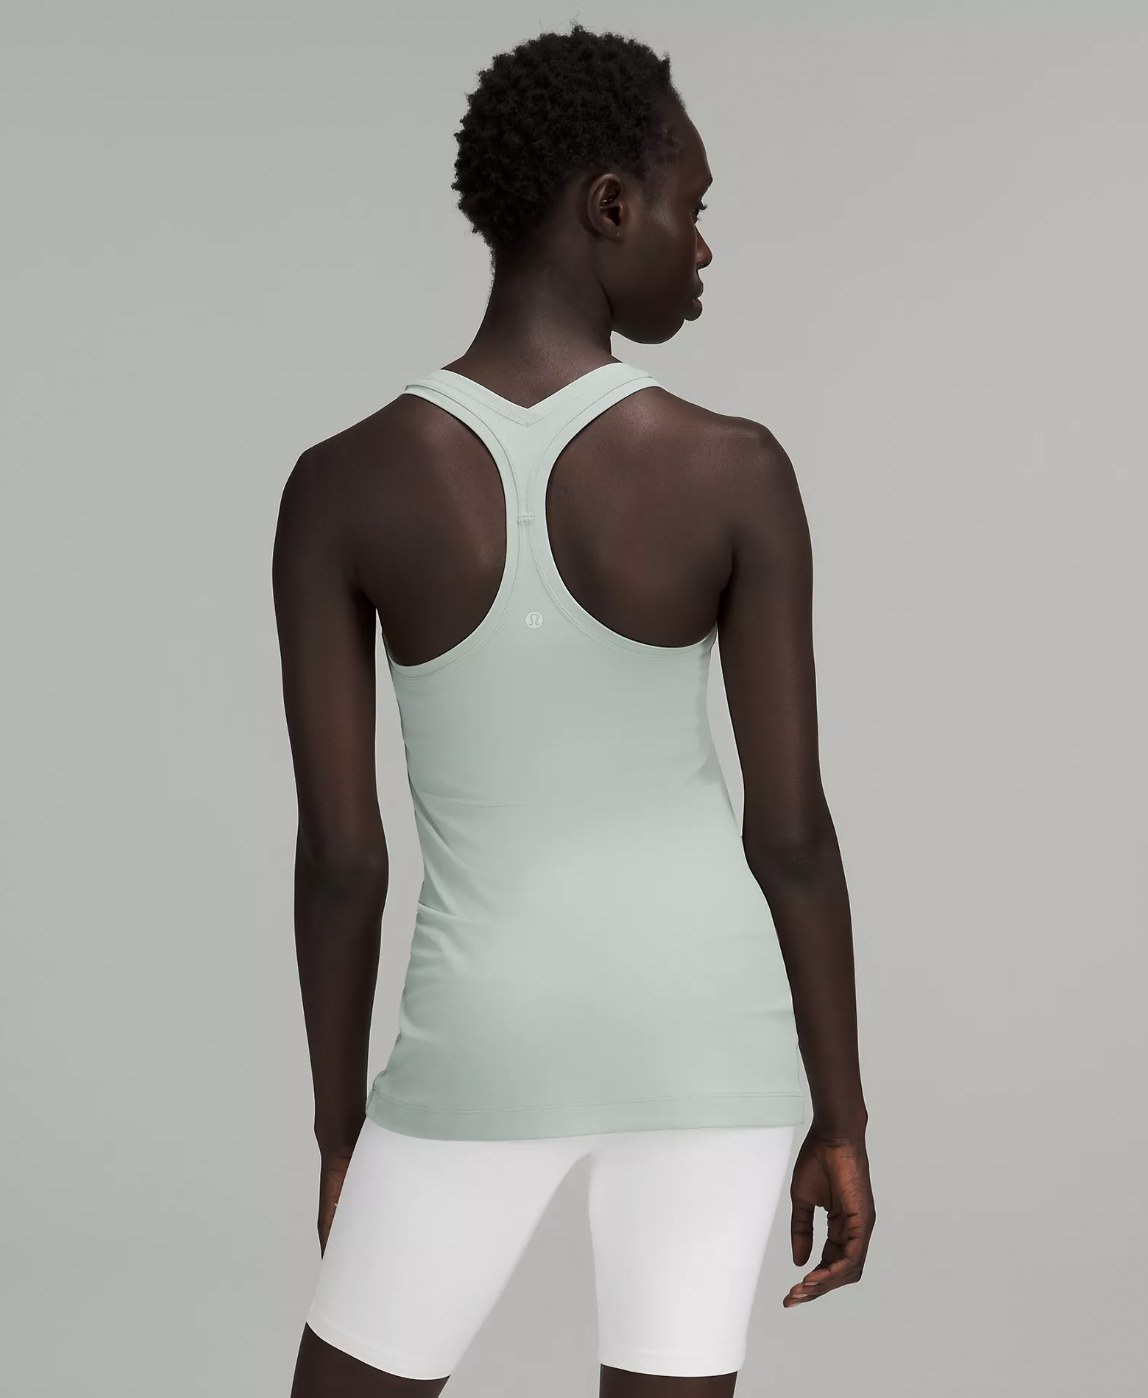 Model shown from behind in light teal racerback tank